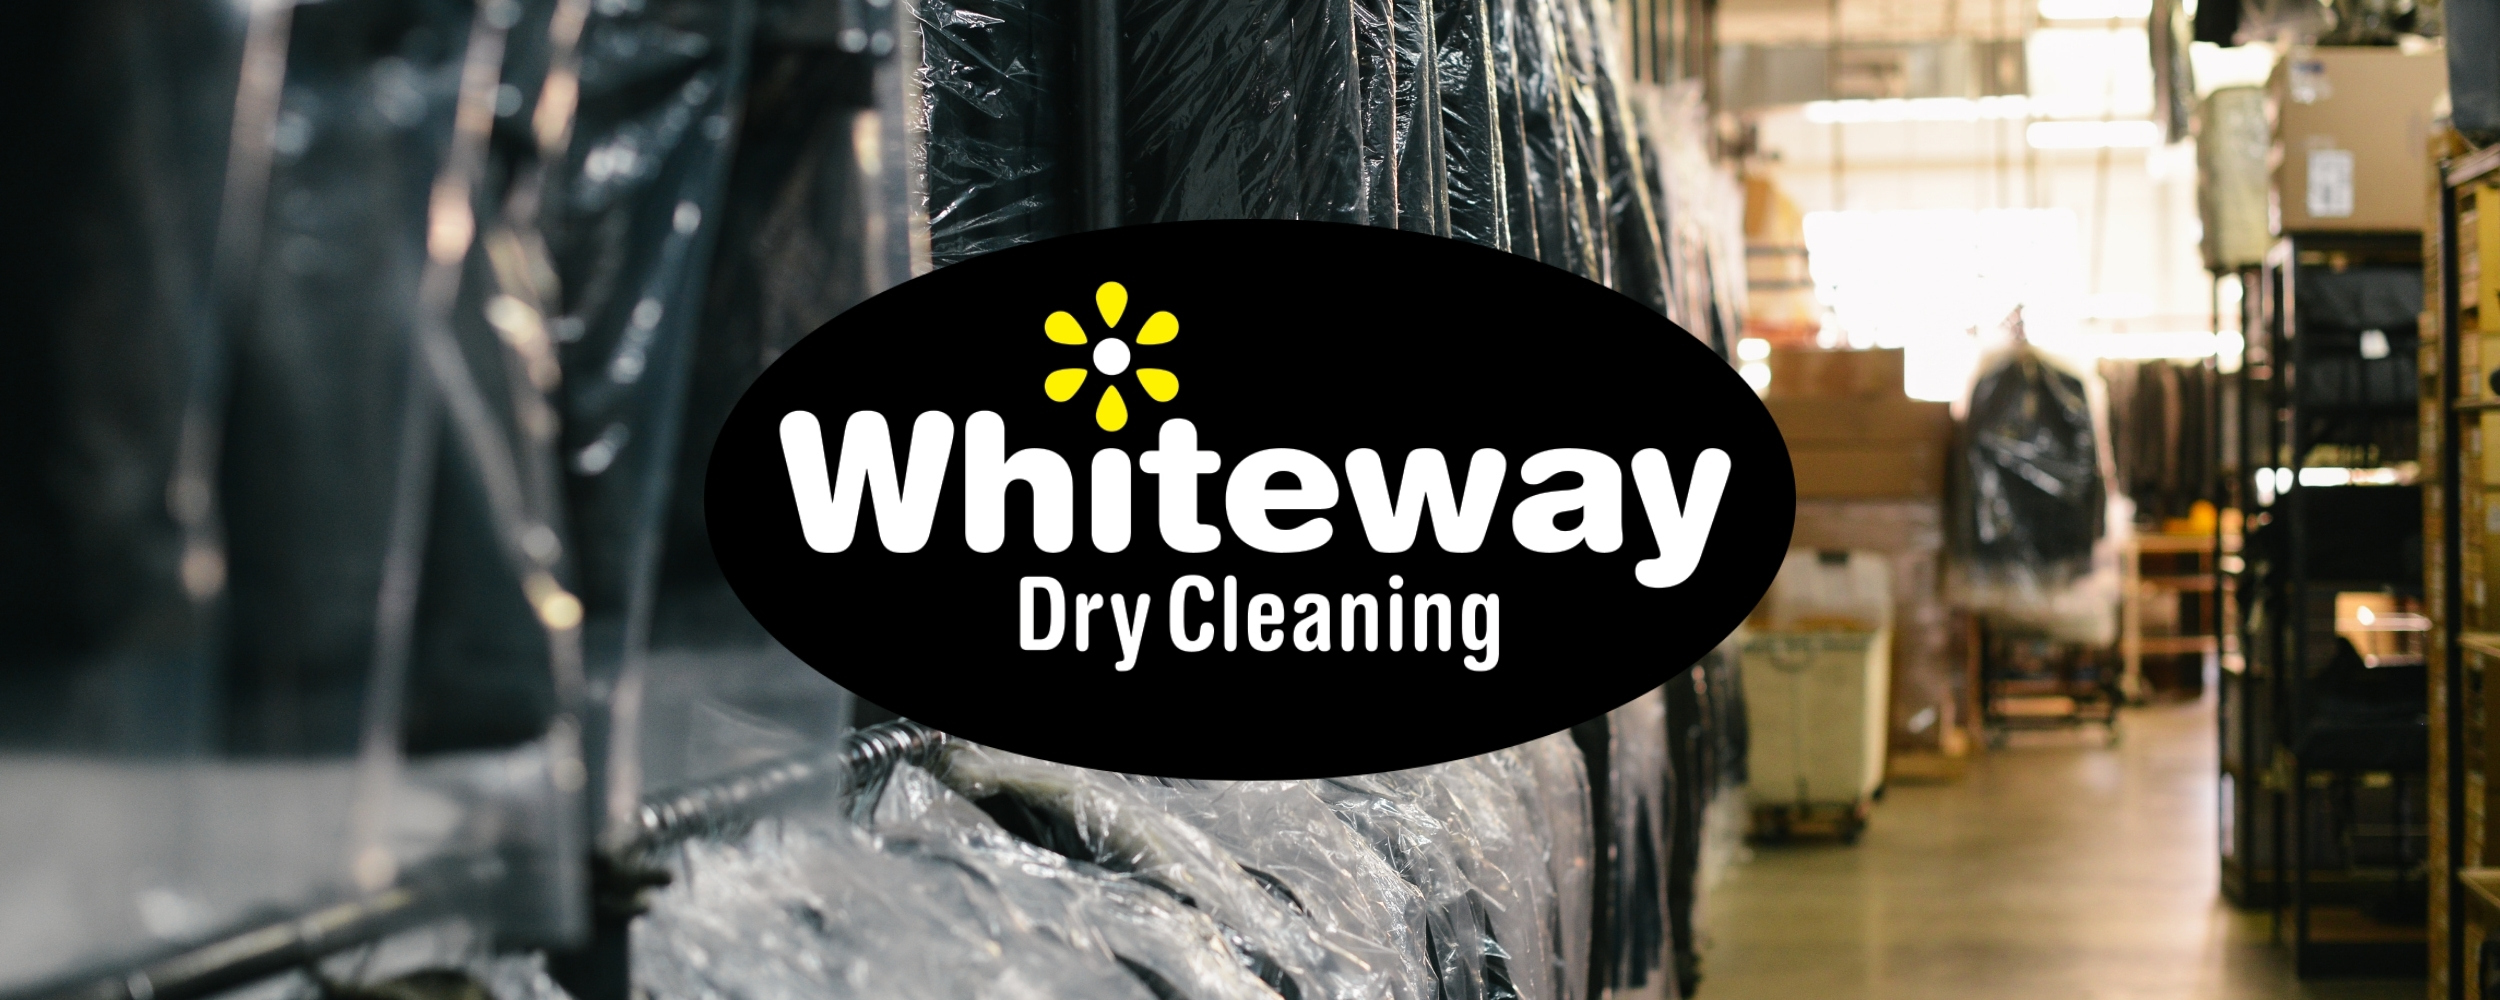 WW Dry Cleaning Featured Image